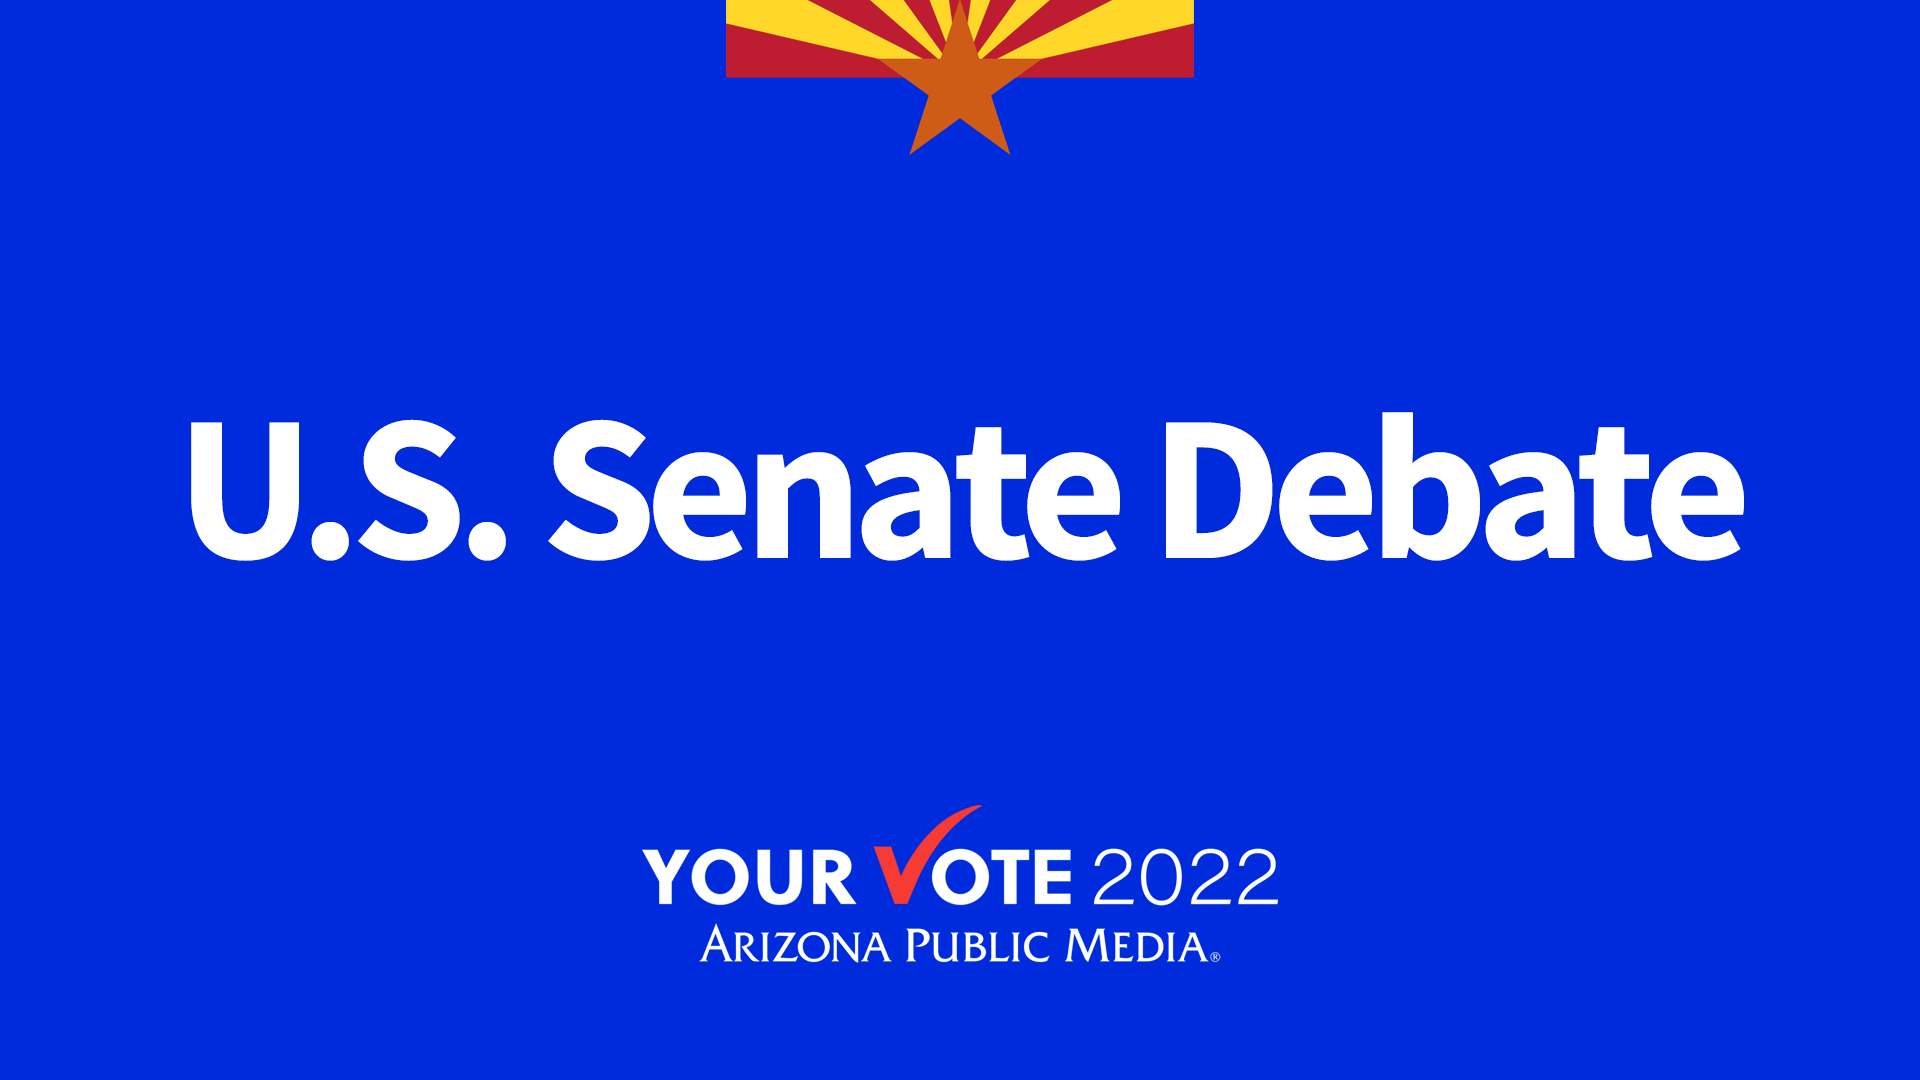 Arizona PBS presents a live U.S. Senate debate with incumbent Democrat Mark Kelly, and challengers Republican Blake Masters and Libertarian Marc Victor. Moderated by Ted Simmons.